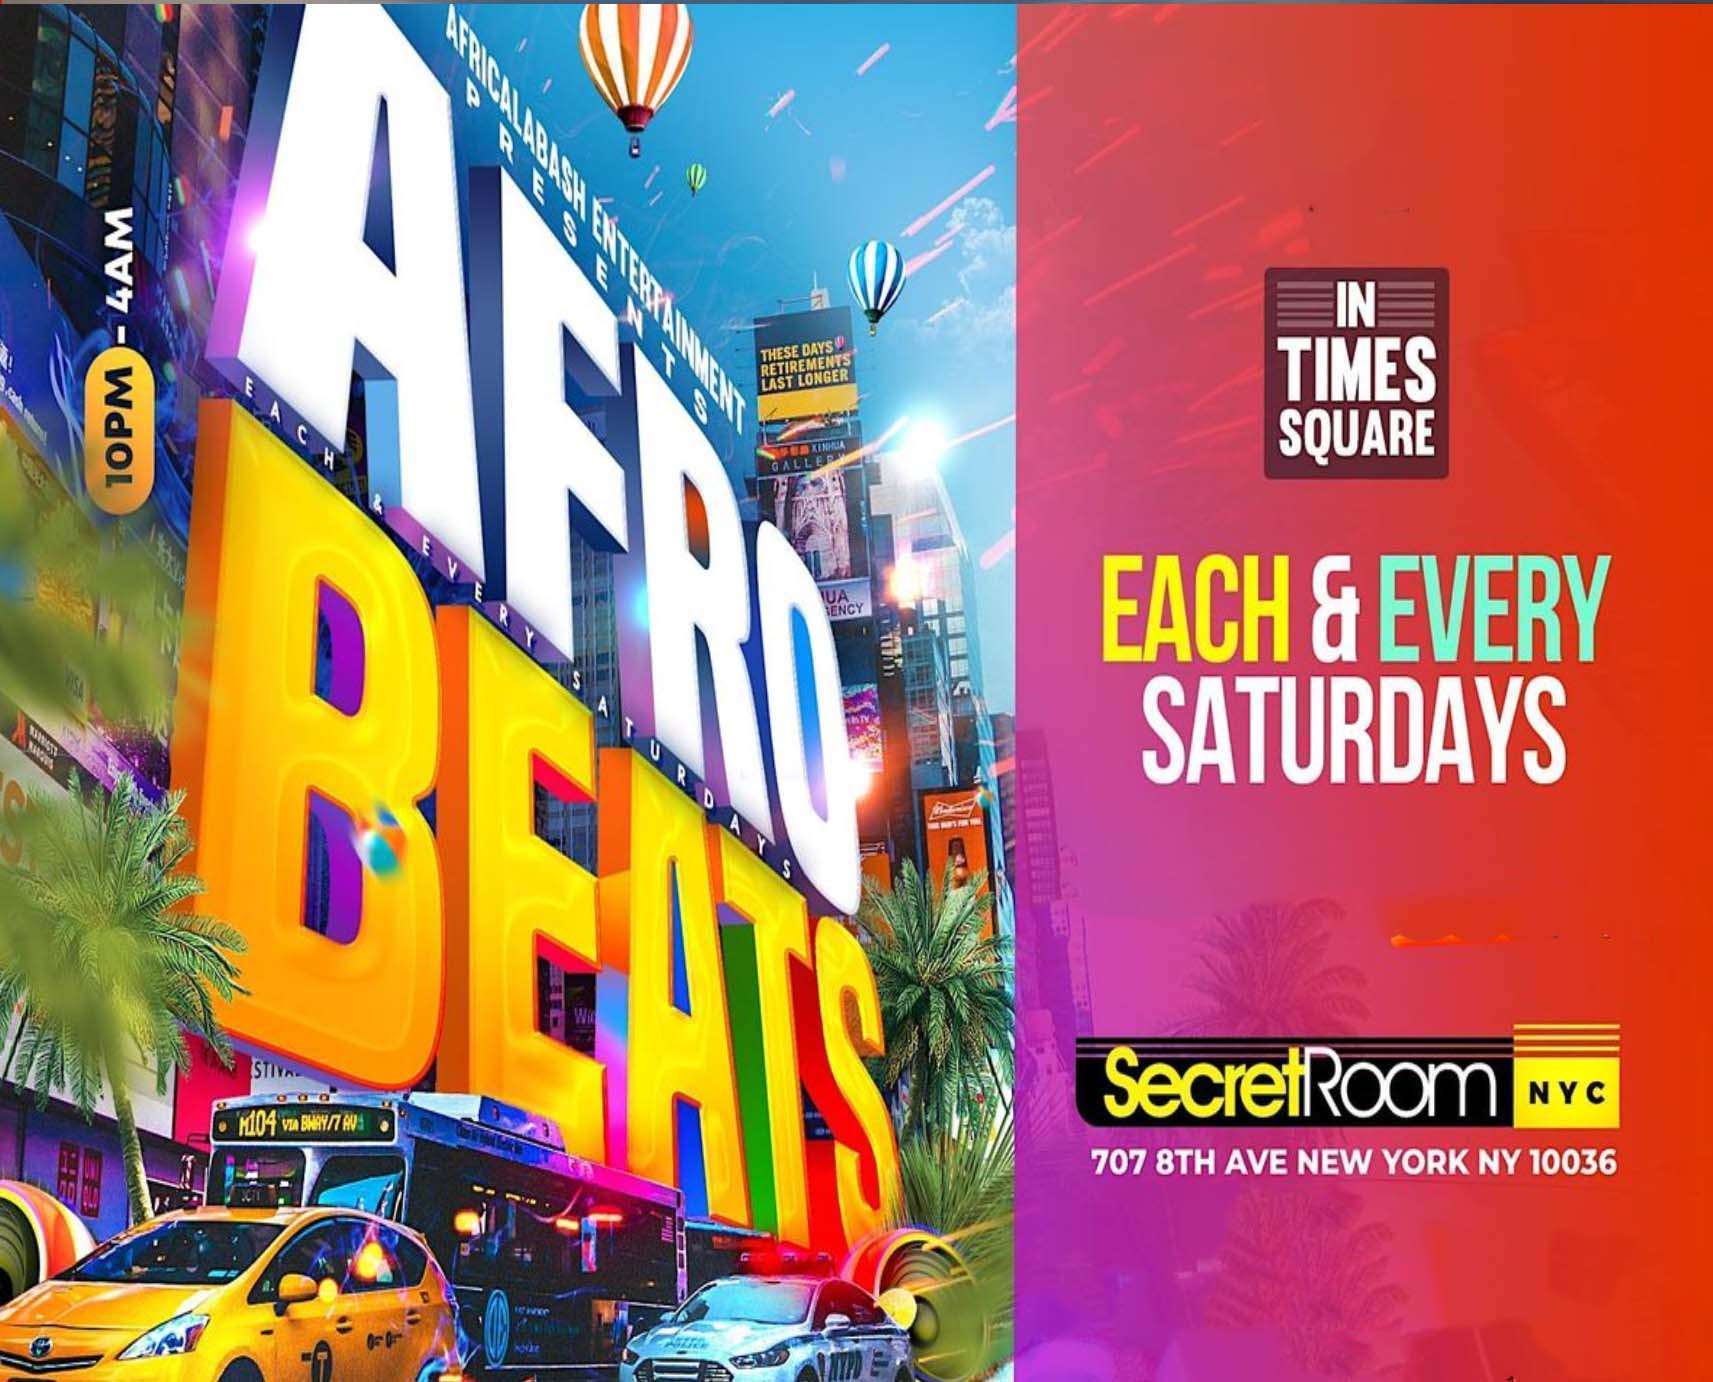 AFROBEATS IN TIMES SQUARE